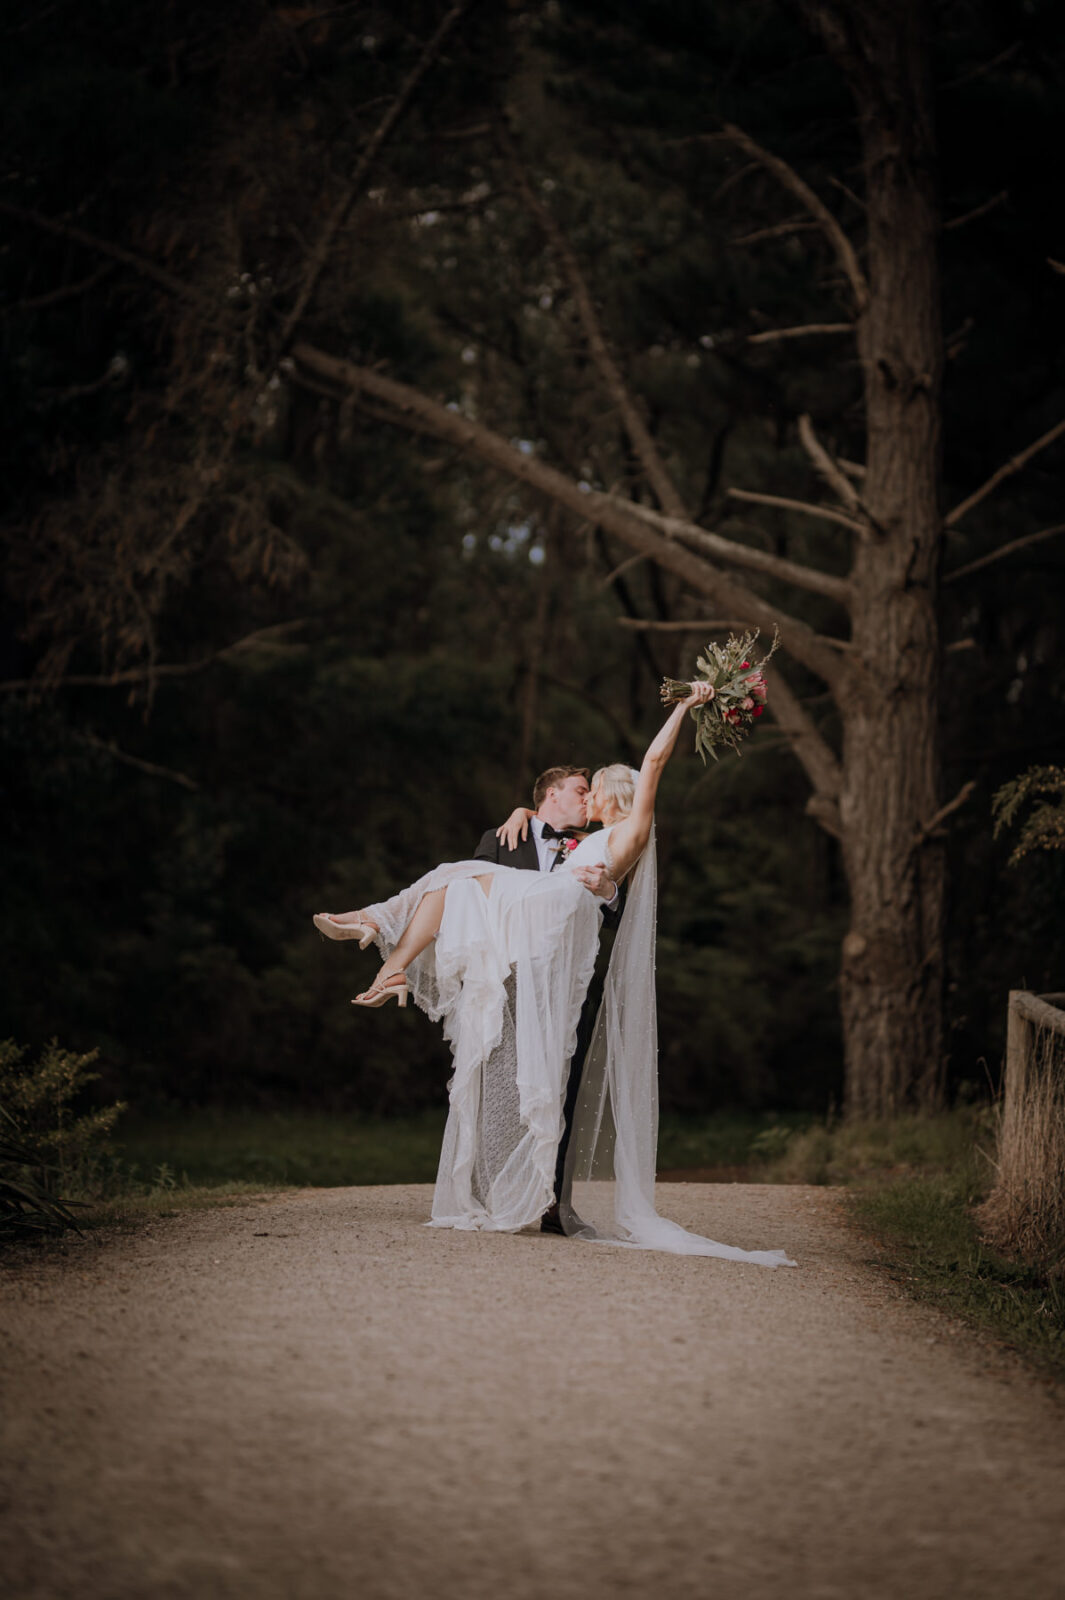 Groom carrying bride on a path in the forest, bride is kissing groom with bouquet raised in the air.